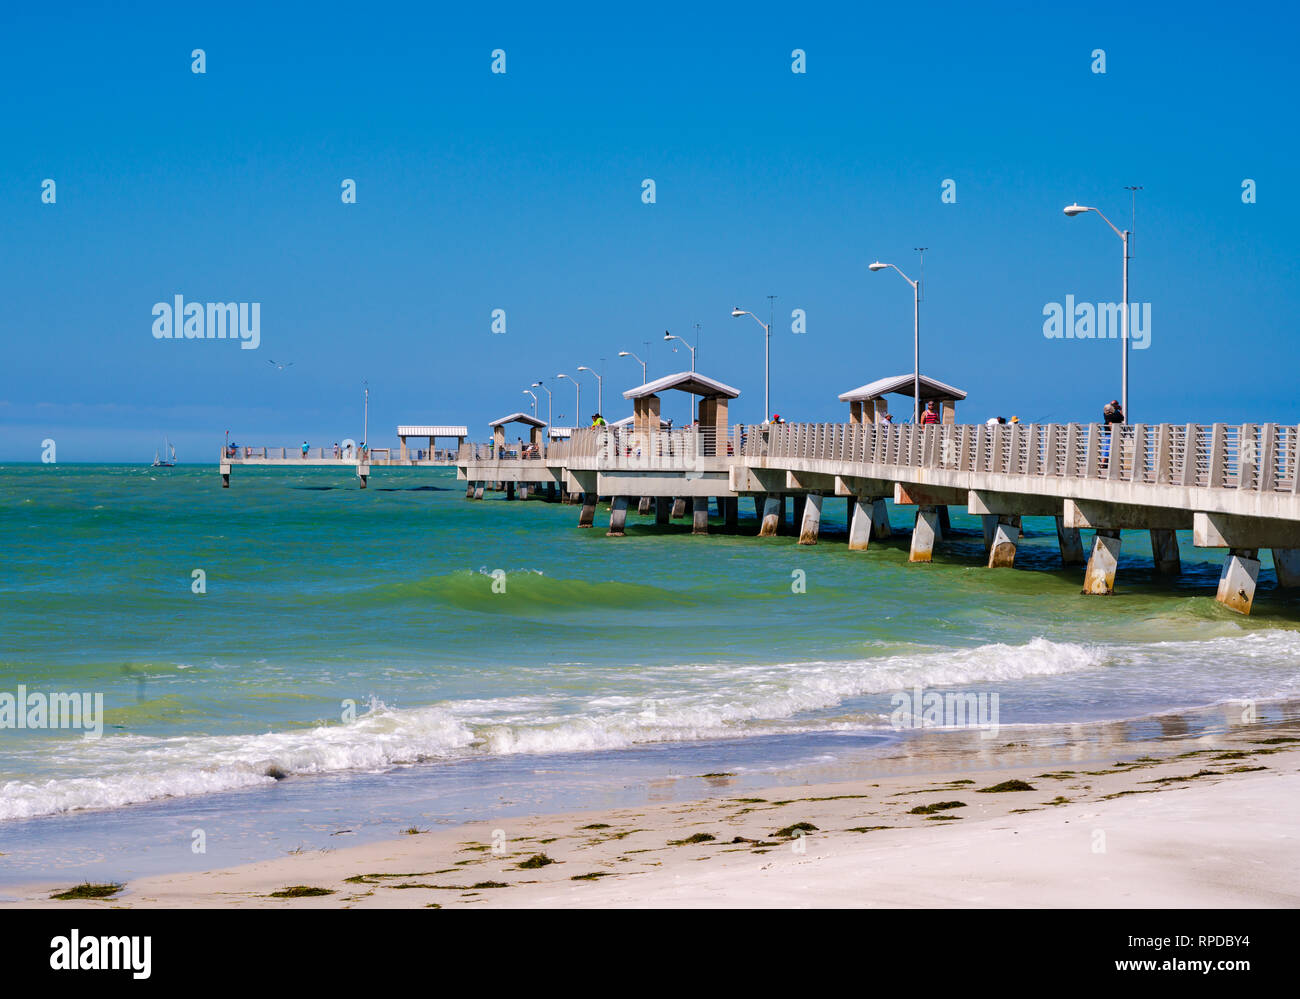 Fort De Soto Park, Florida -- February 17, 2019. Photo of a long pier in the Gulf of Mexico with fishermen and tourists. Stock Photo